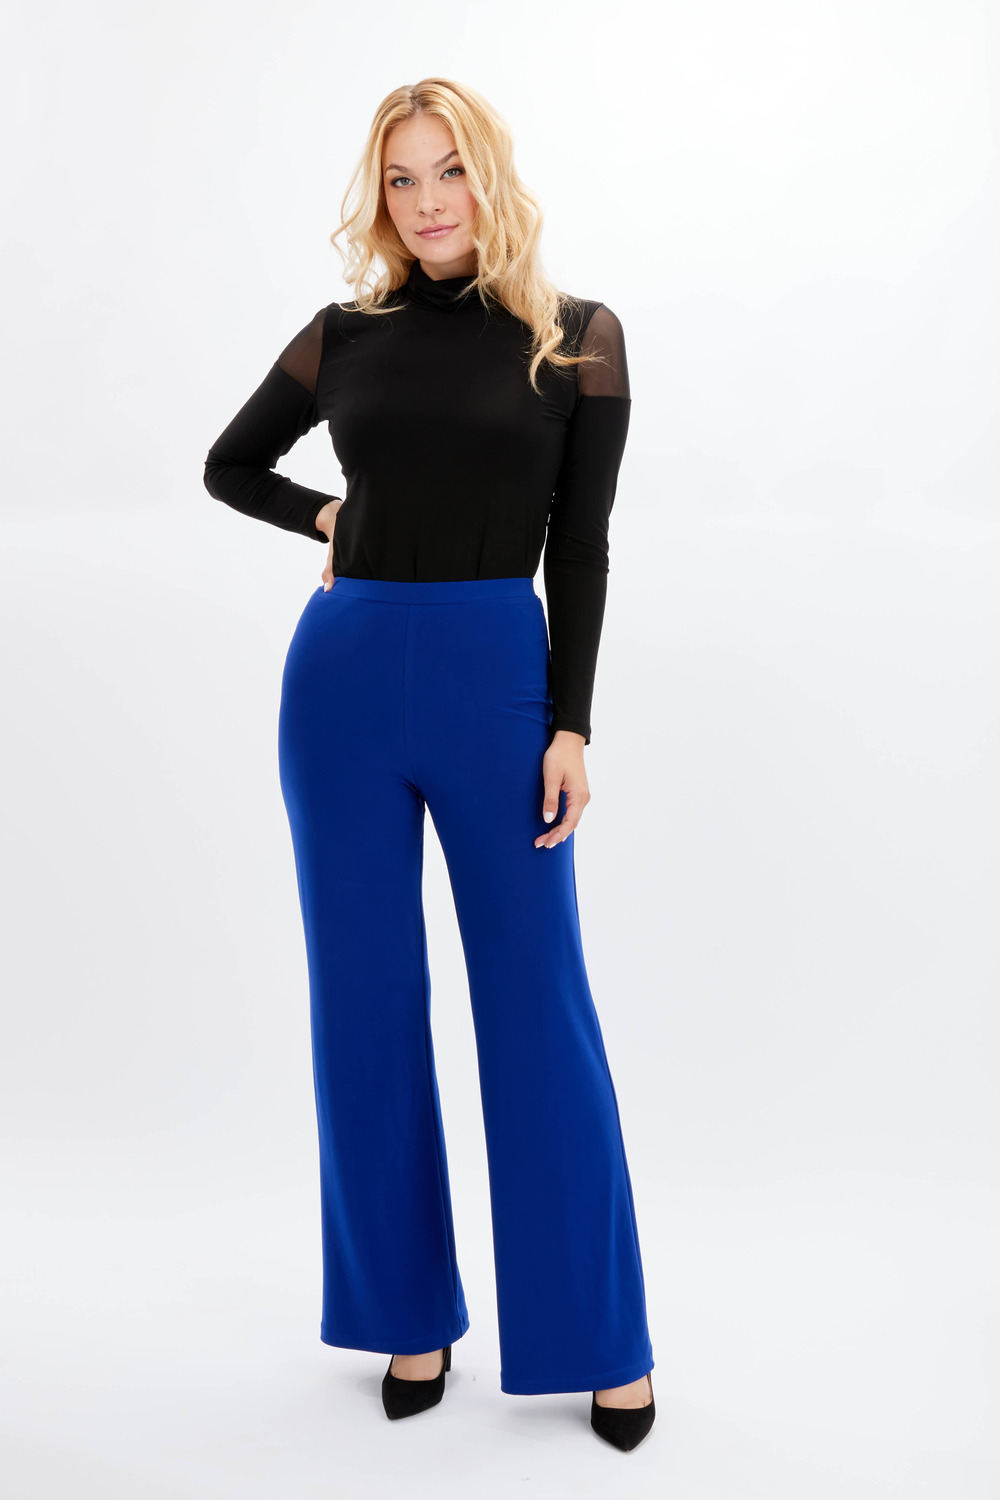 Contour Band Flared Pants Style 234004. Imperial Blue